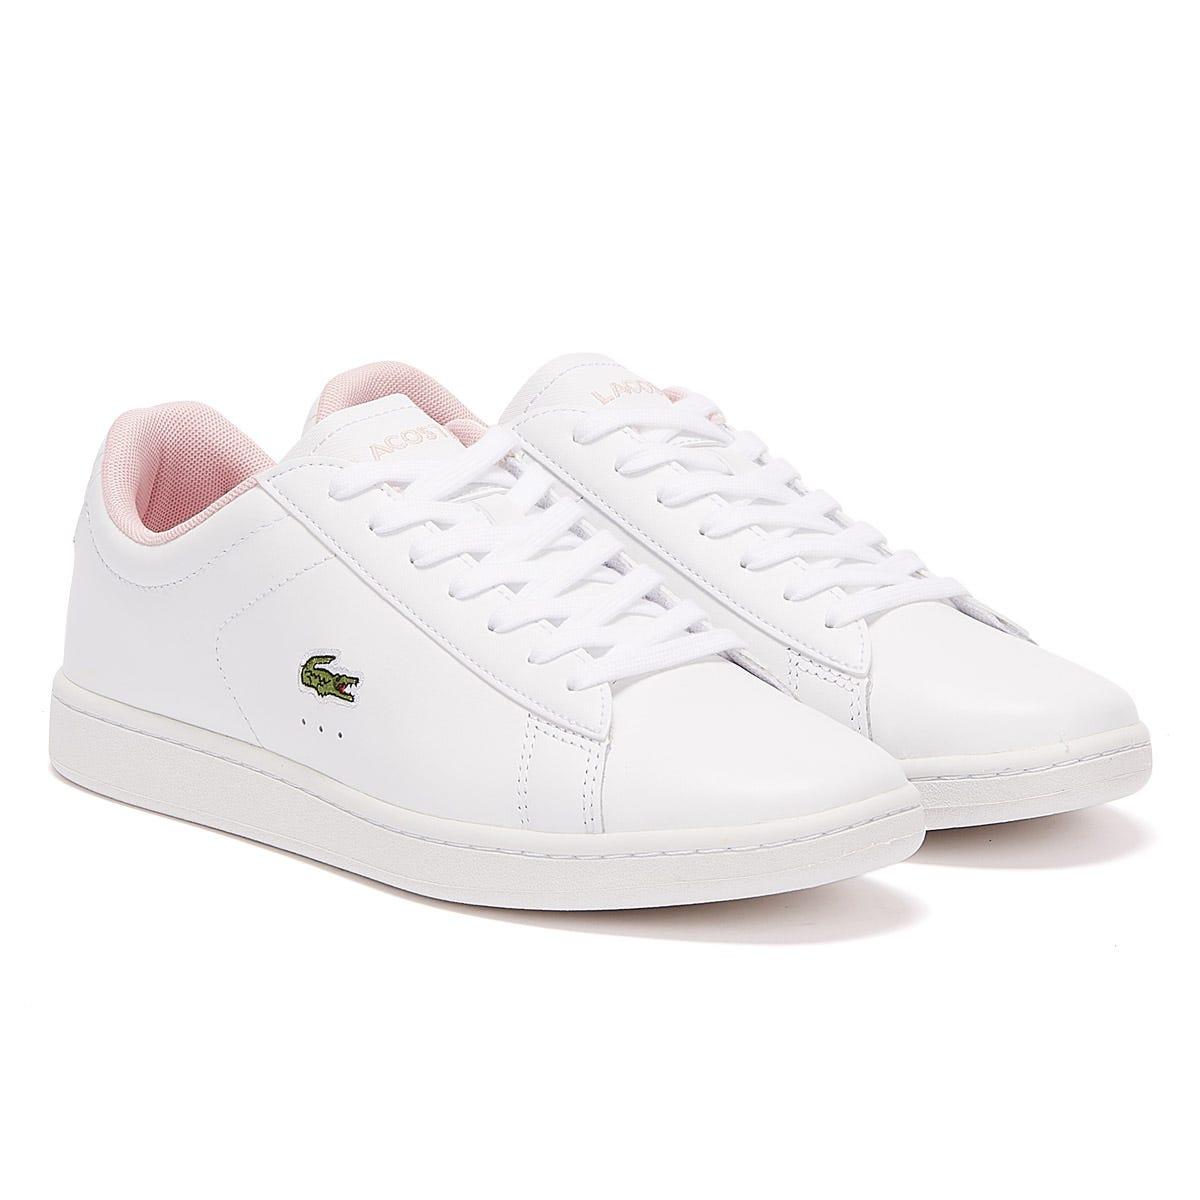 Lacoste White Shoes Womens Discount, SAVE 49% - aveclumiere.com